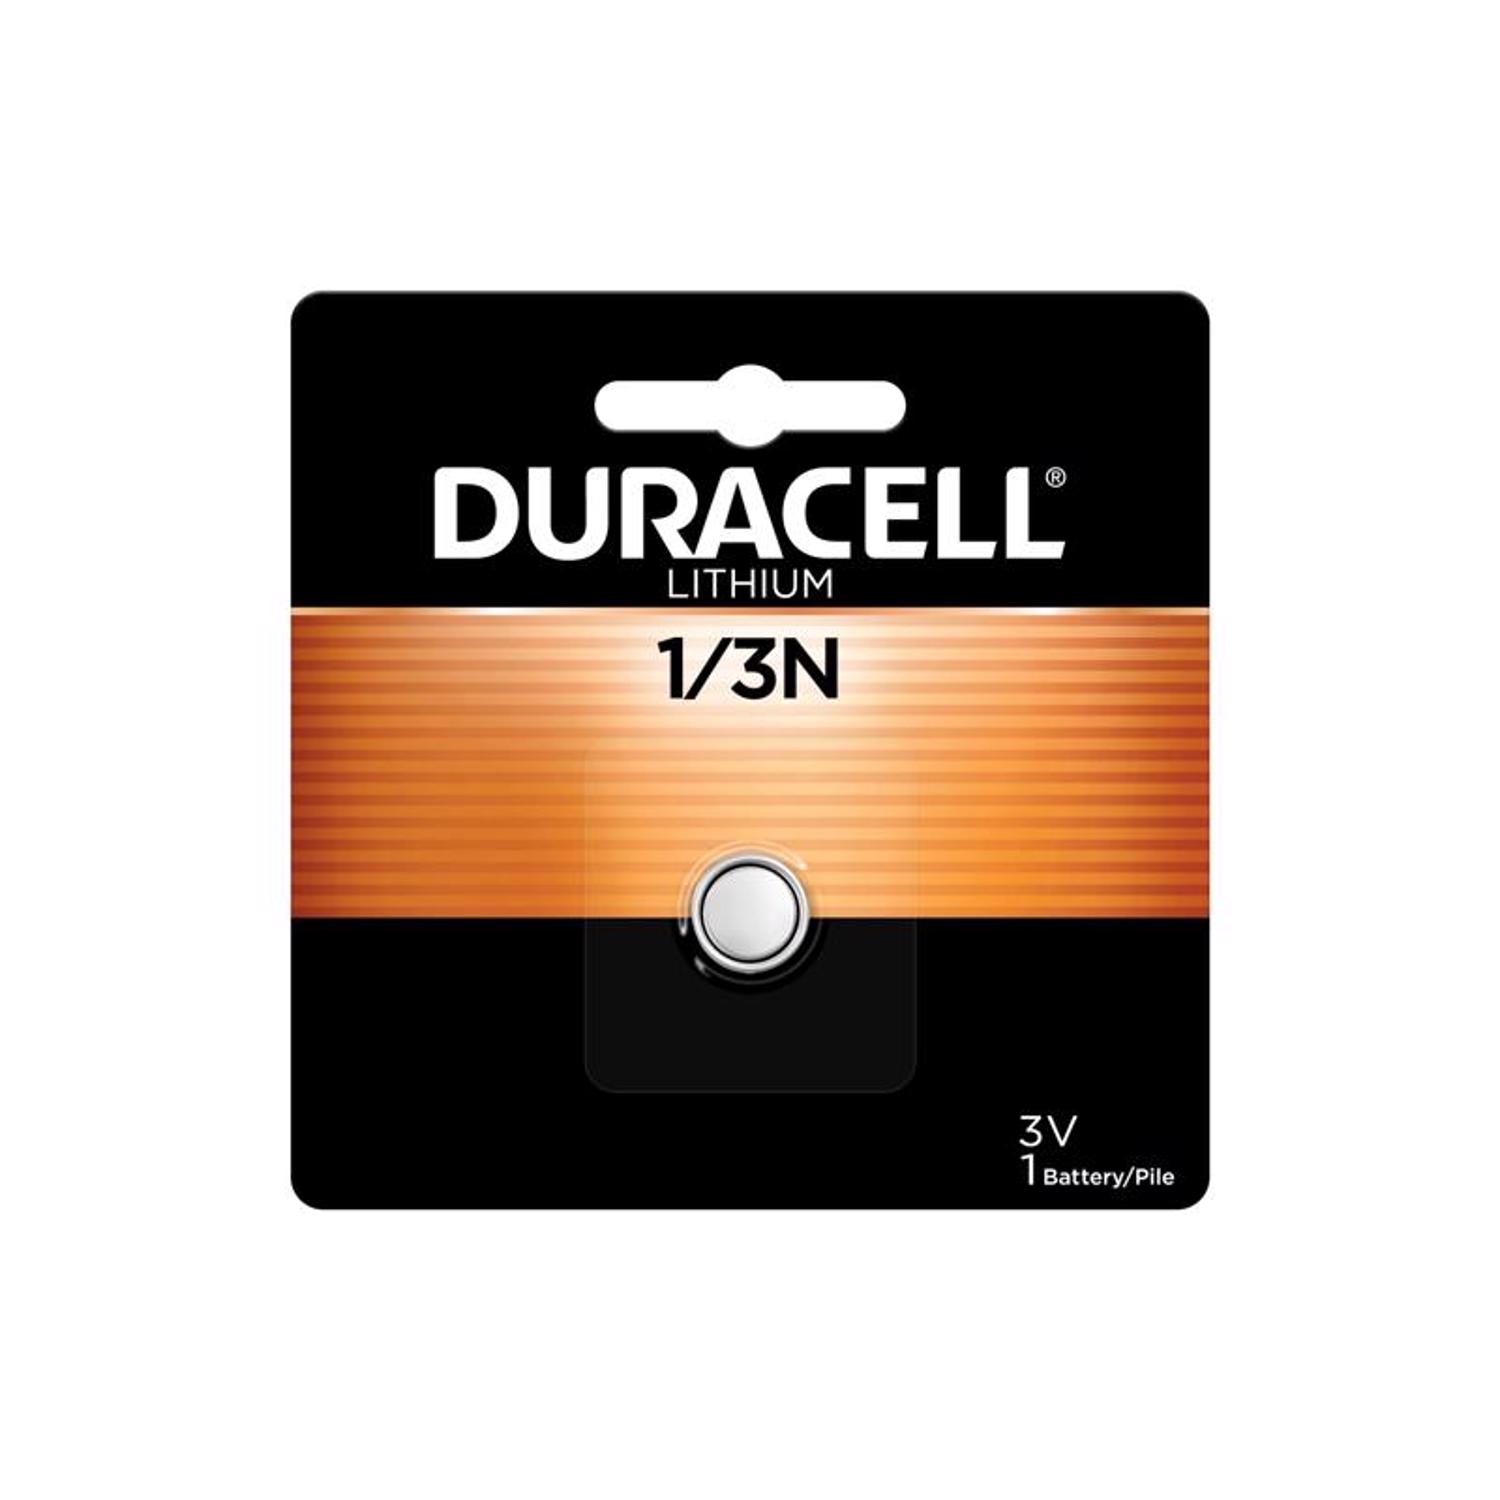 Duracell Silver Oxide 370/371 1.5 V 40 mAh Button Cell Battery 1